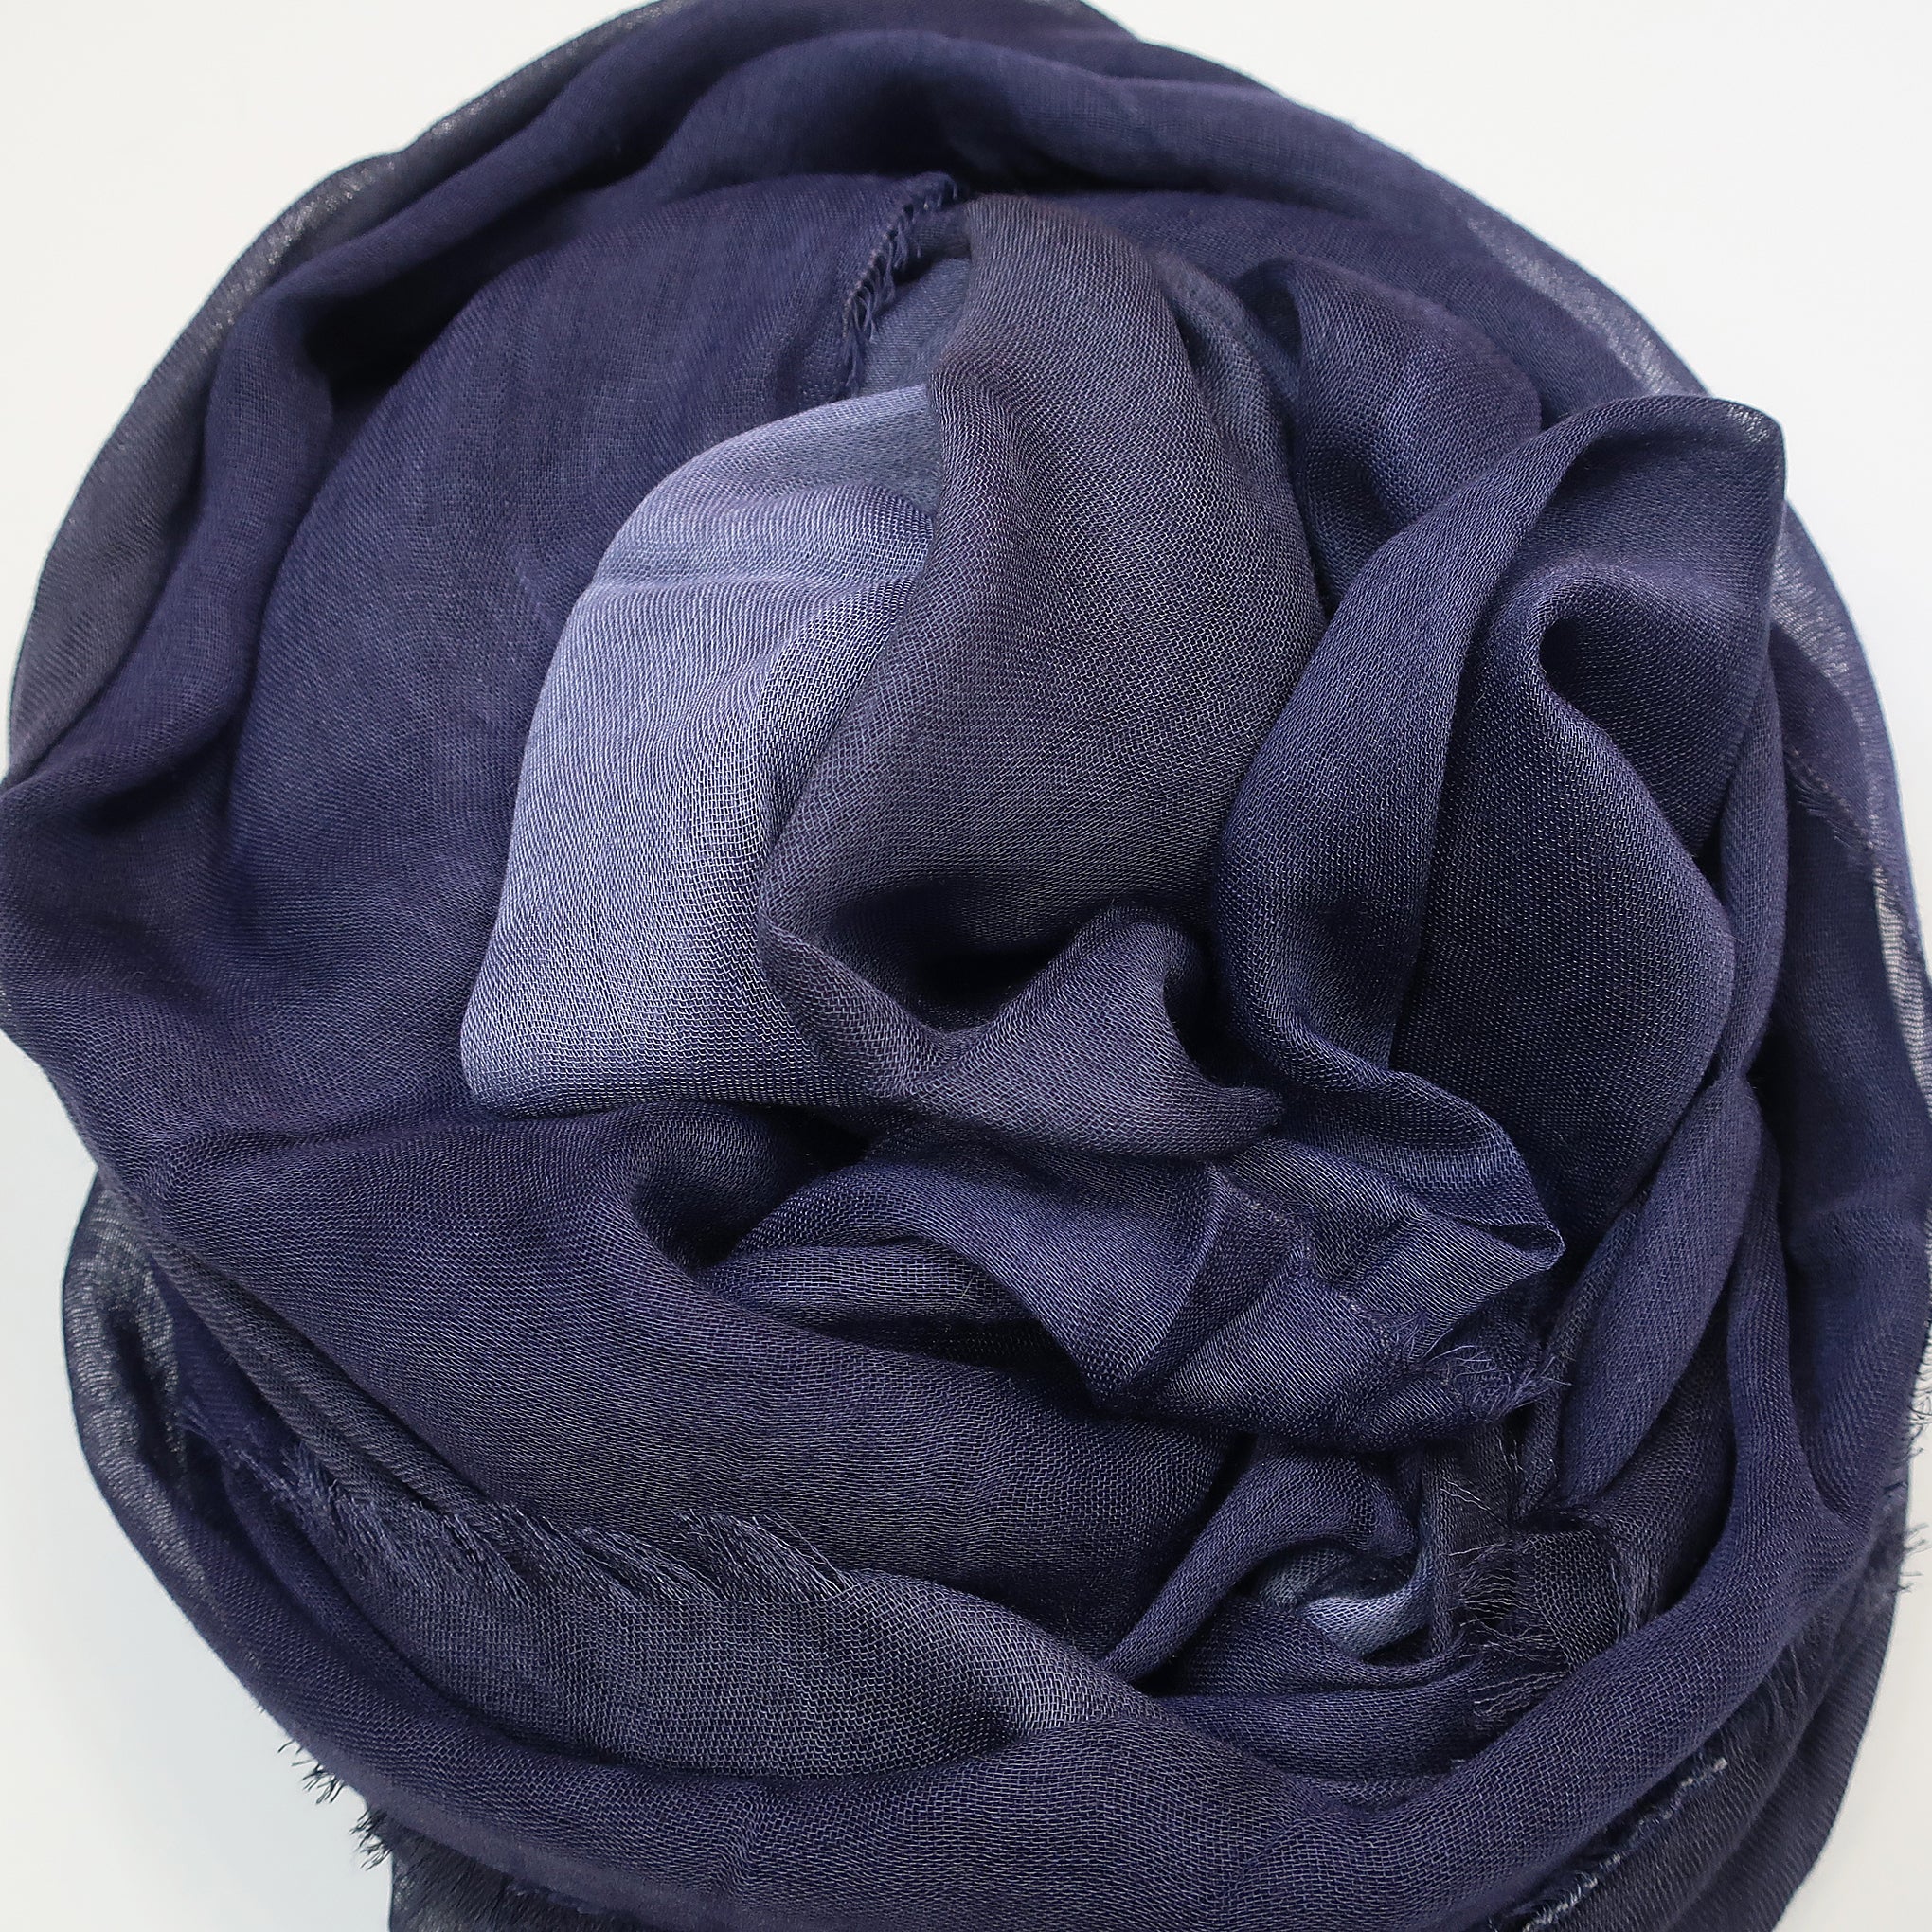 Blue Pacific Dream Cashmere and Silk Scarf in Vintage Indigo and Gray 47 x 37